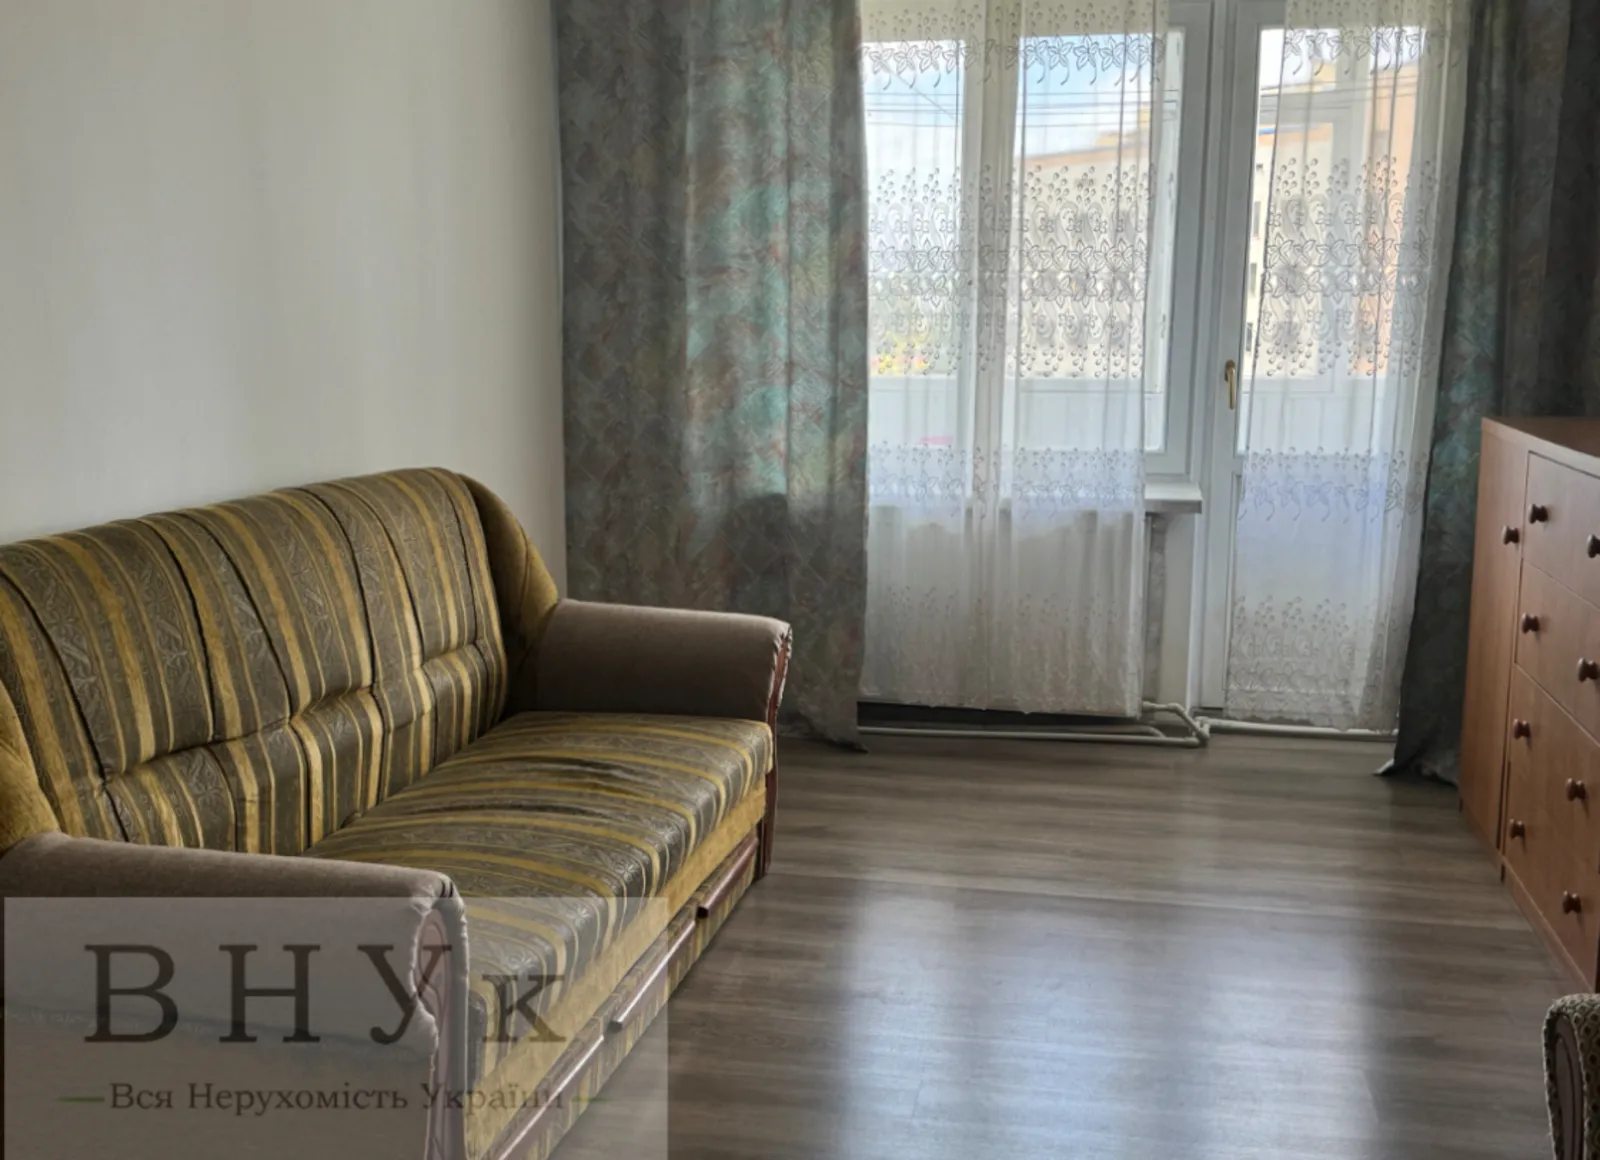 Apartments for sale. 1 room, 30 m², 5th floor/5 floors. Fabrychna vul., Ternopil. 